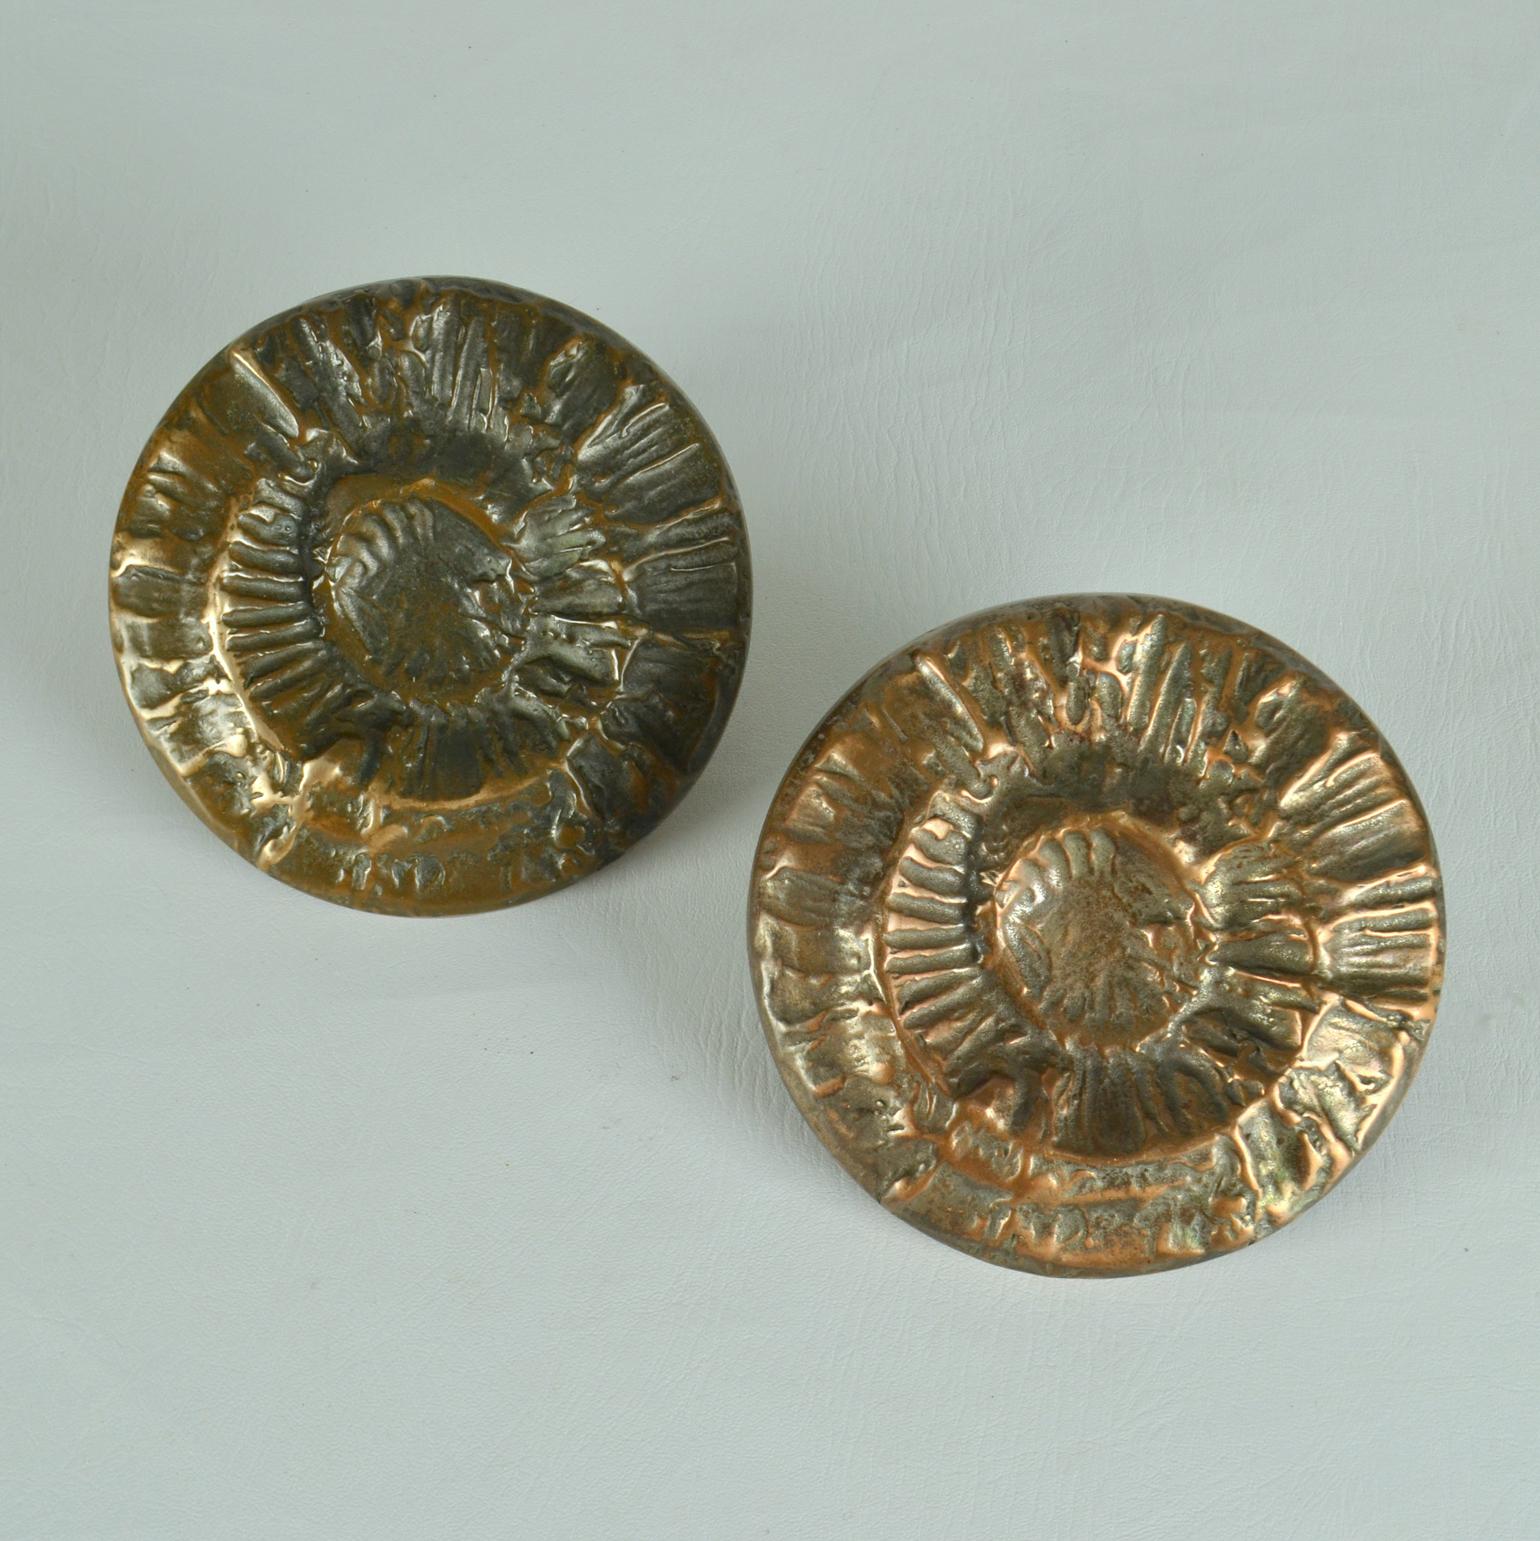 Architectural Pair of Round Bronze Push Pull Relief Door Handles and Keyholes 7